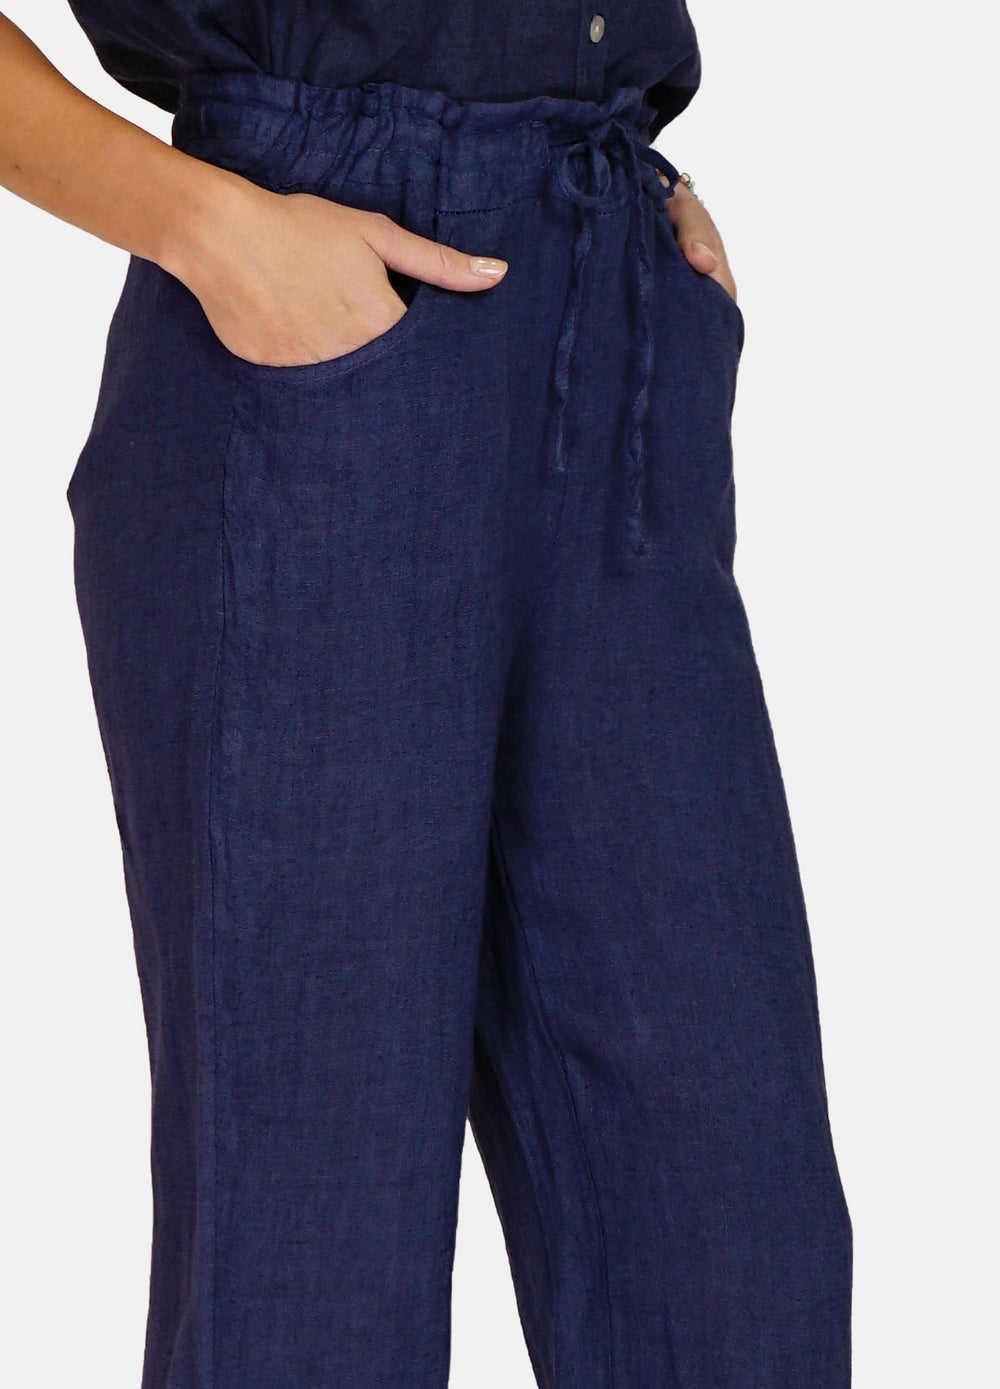 Pants in high waist pockets with Lacy